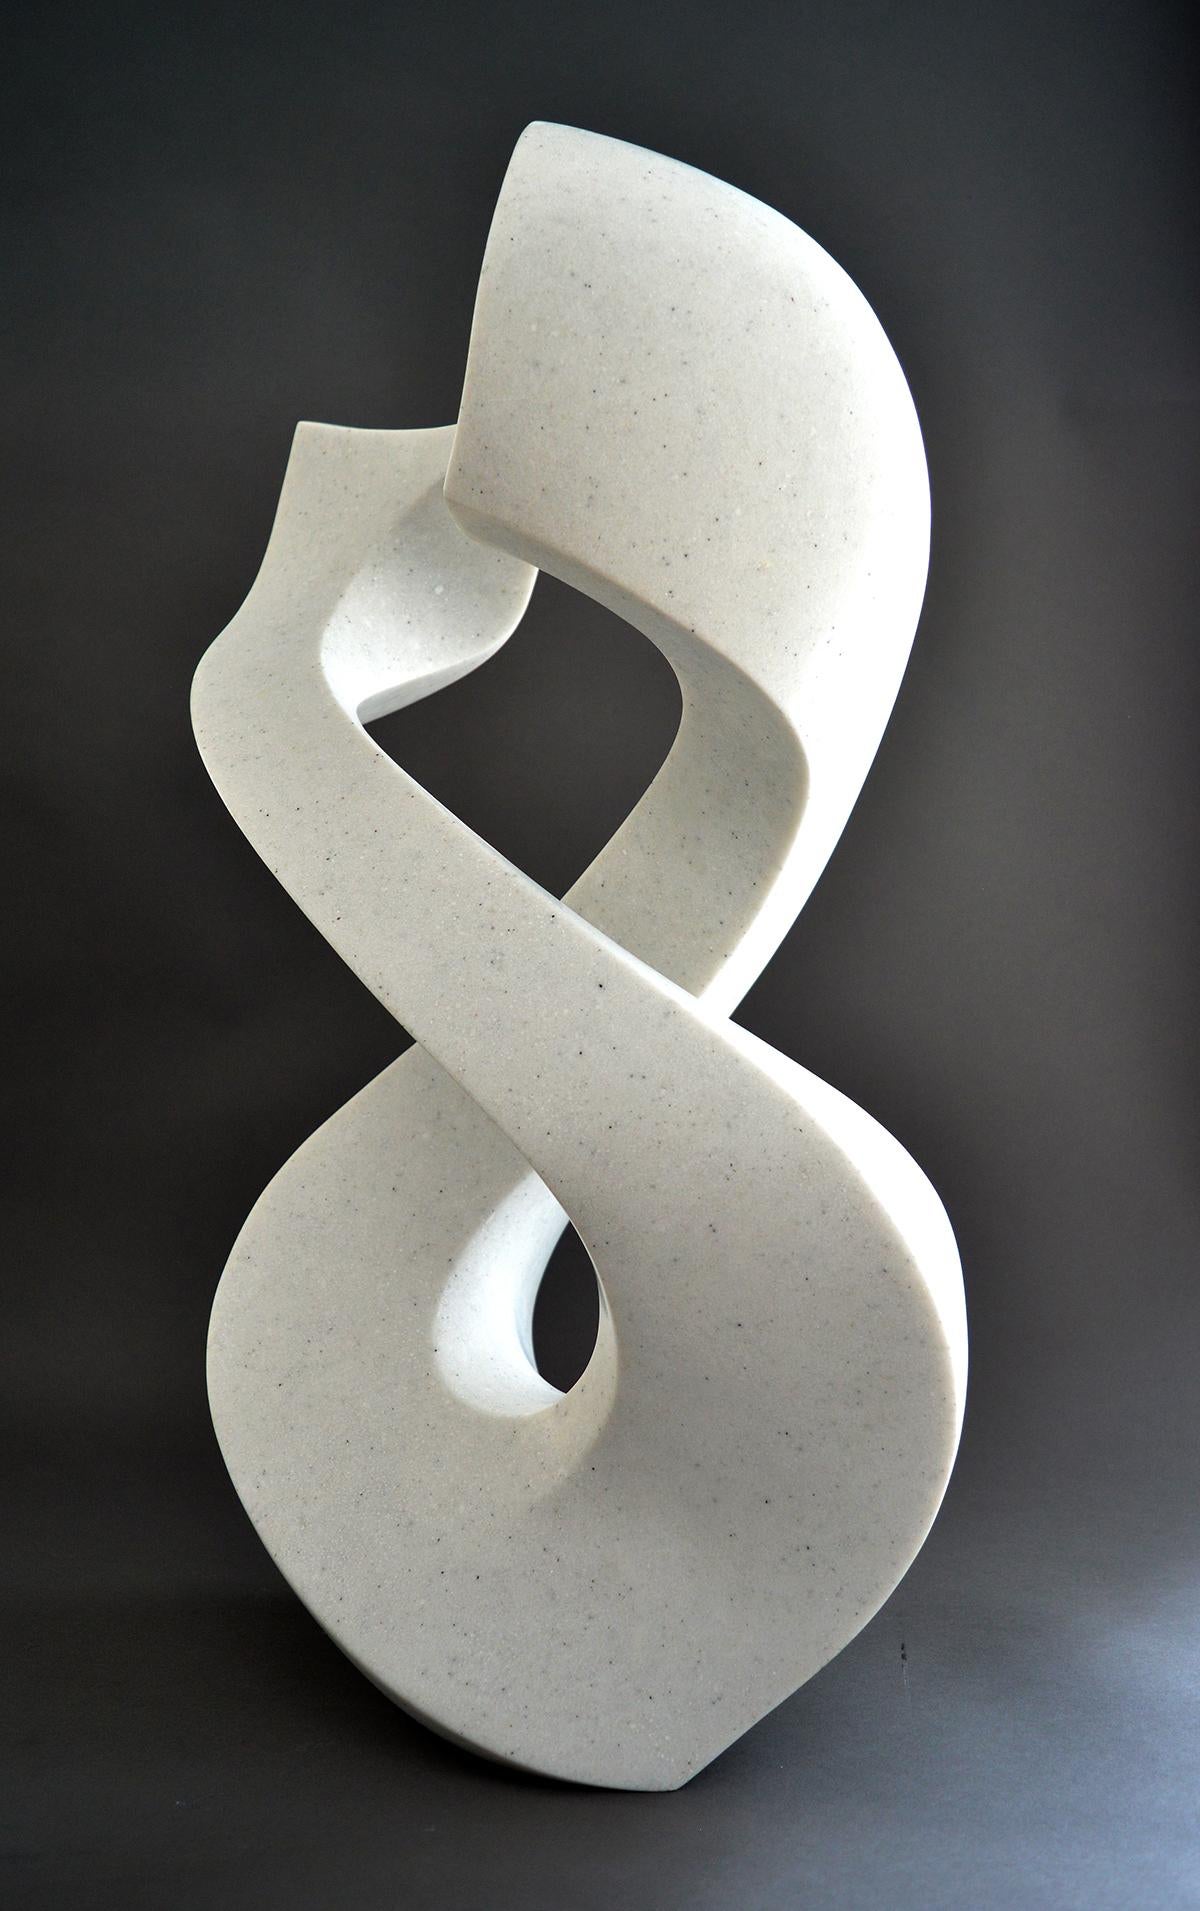 Halcyon White 4/50 - smooth, polished, abstract, engineered stone sculpture - Sculpture by Jeremy Guy